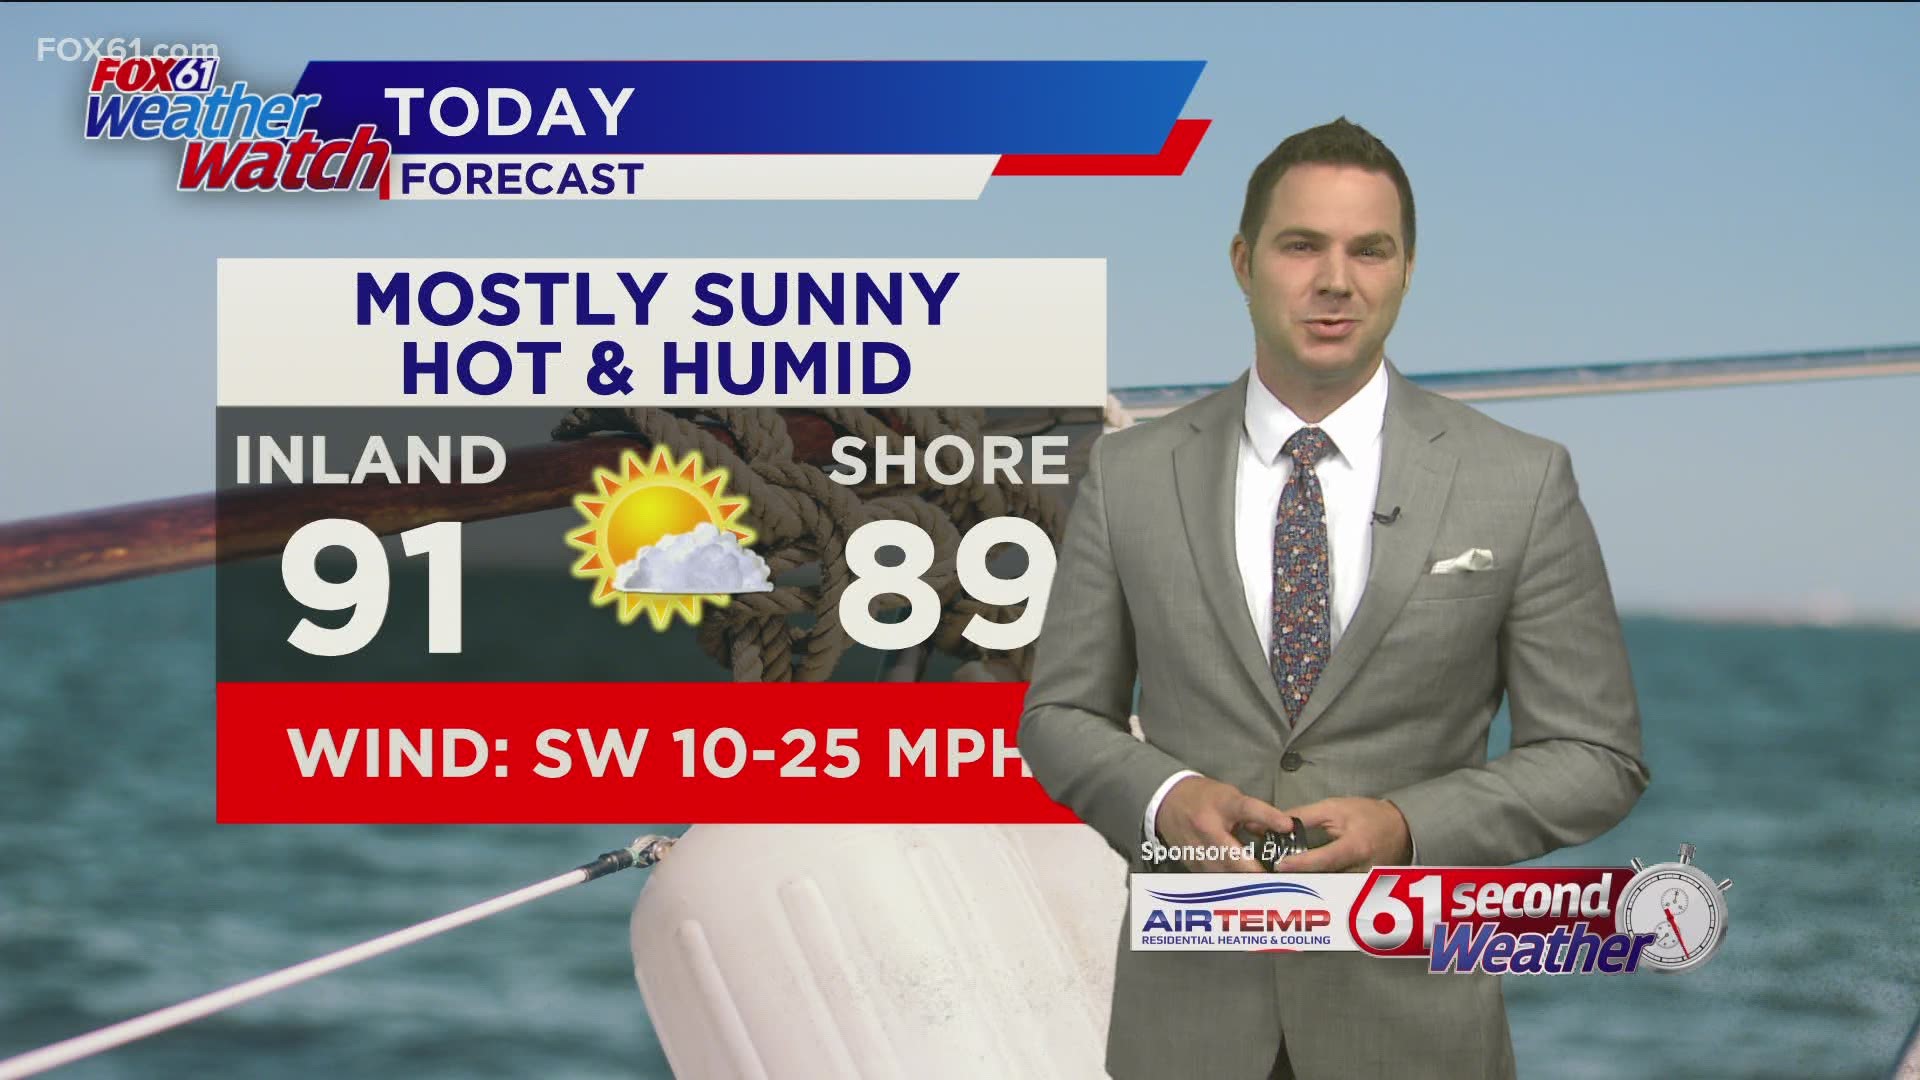 Monday will be hot and humid